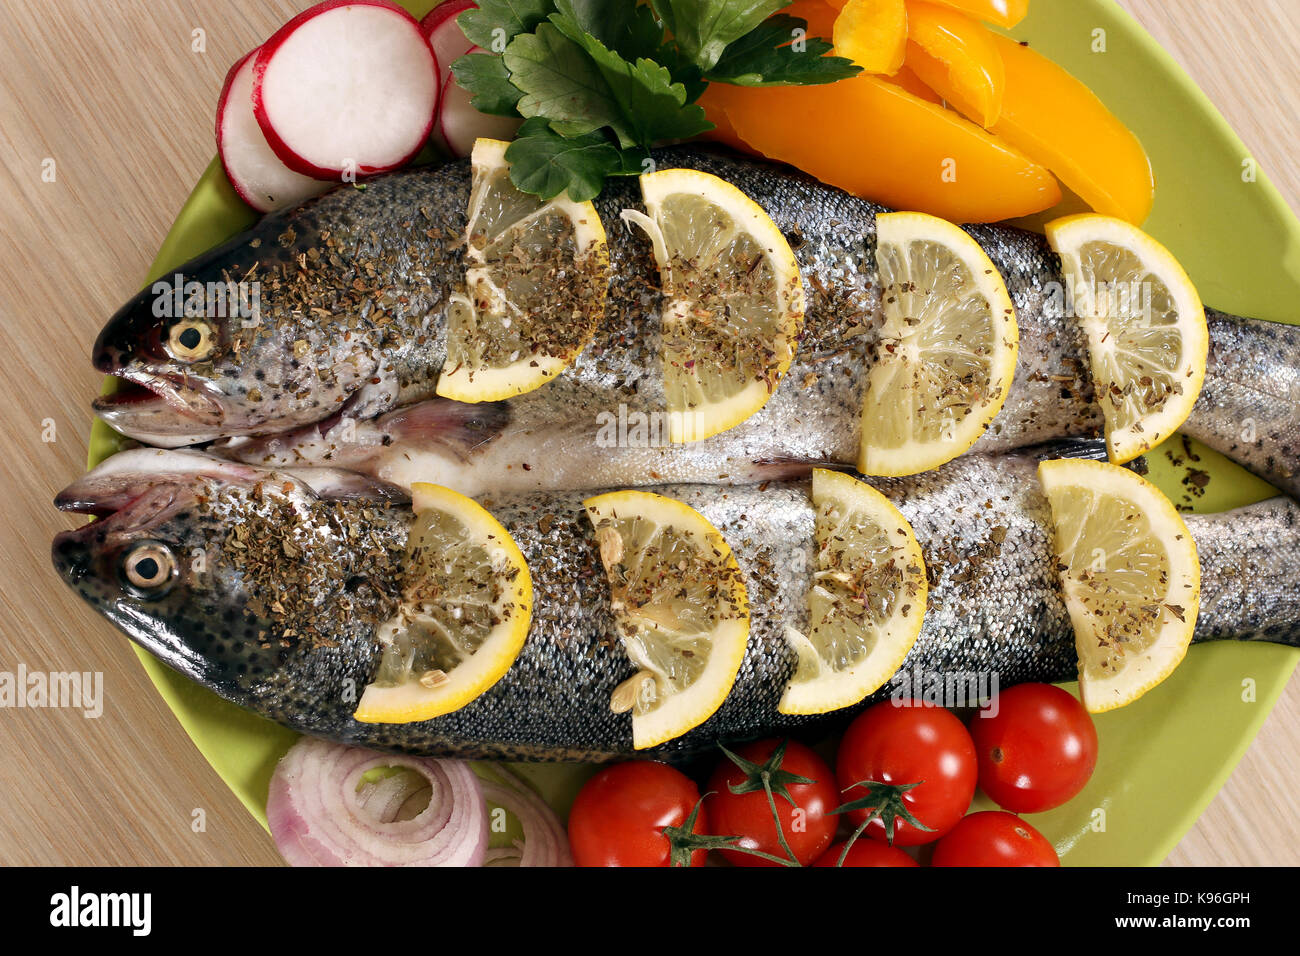 trout fish with salad on plate Stock Photo